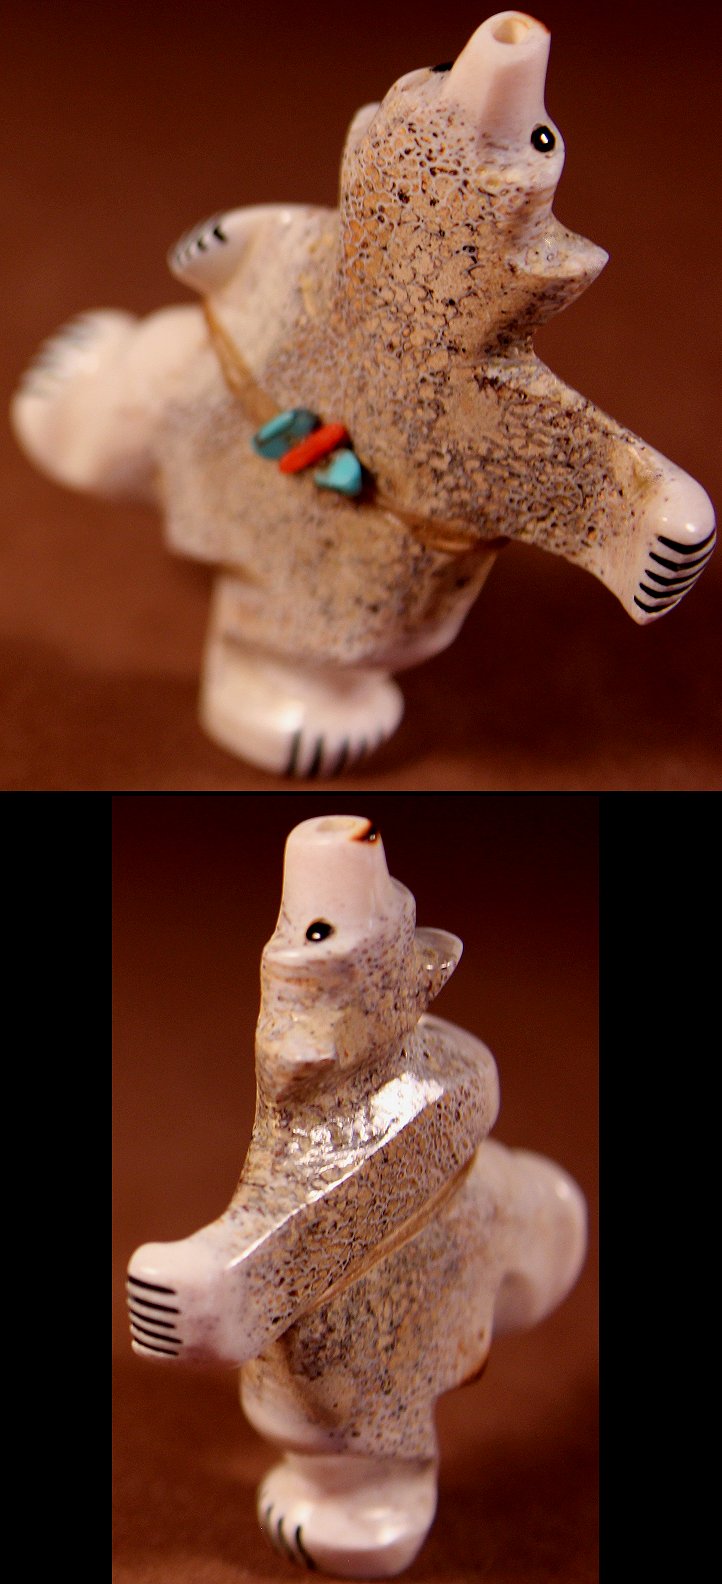 Zuni fetishes are treasures from the talented artisans of Zuni Pueblo, NM!